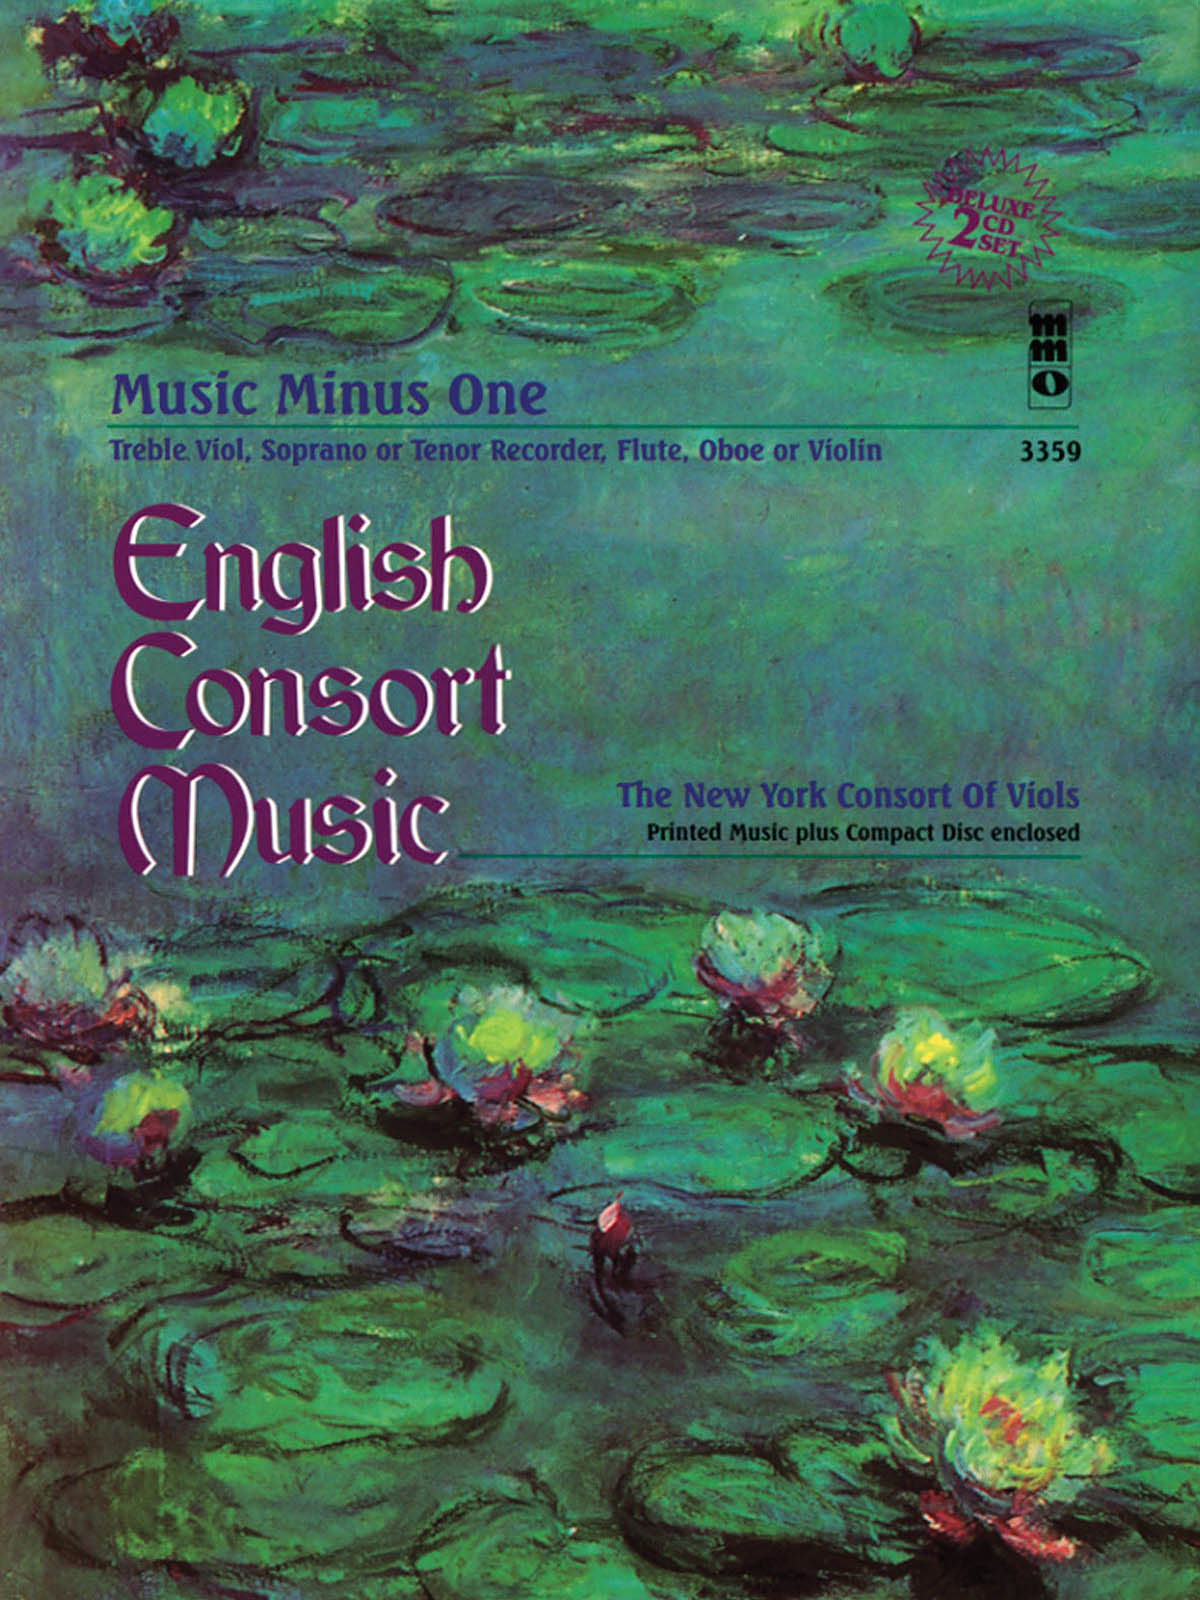 English Consort Music - Music Minus One Recorder Deluxe 2-CD Set